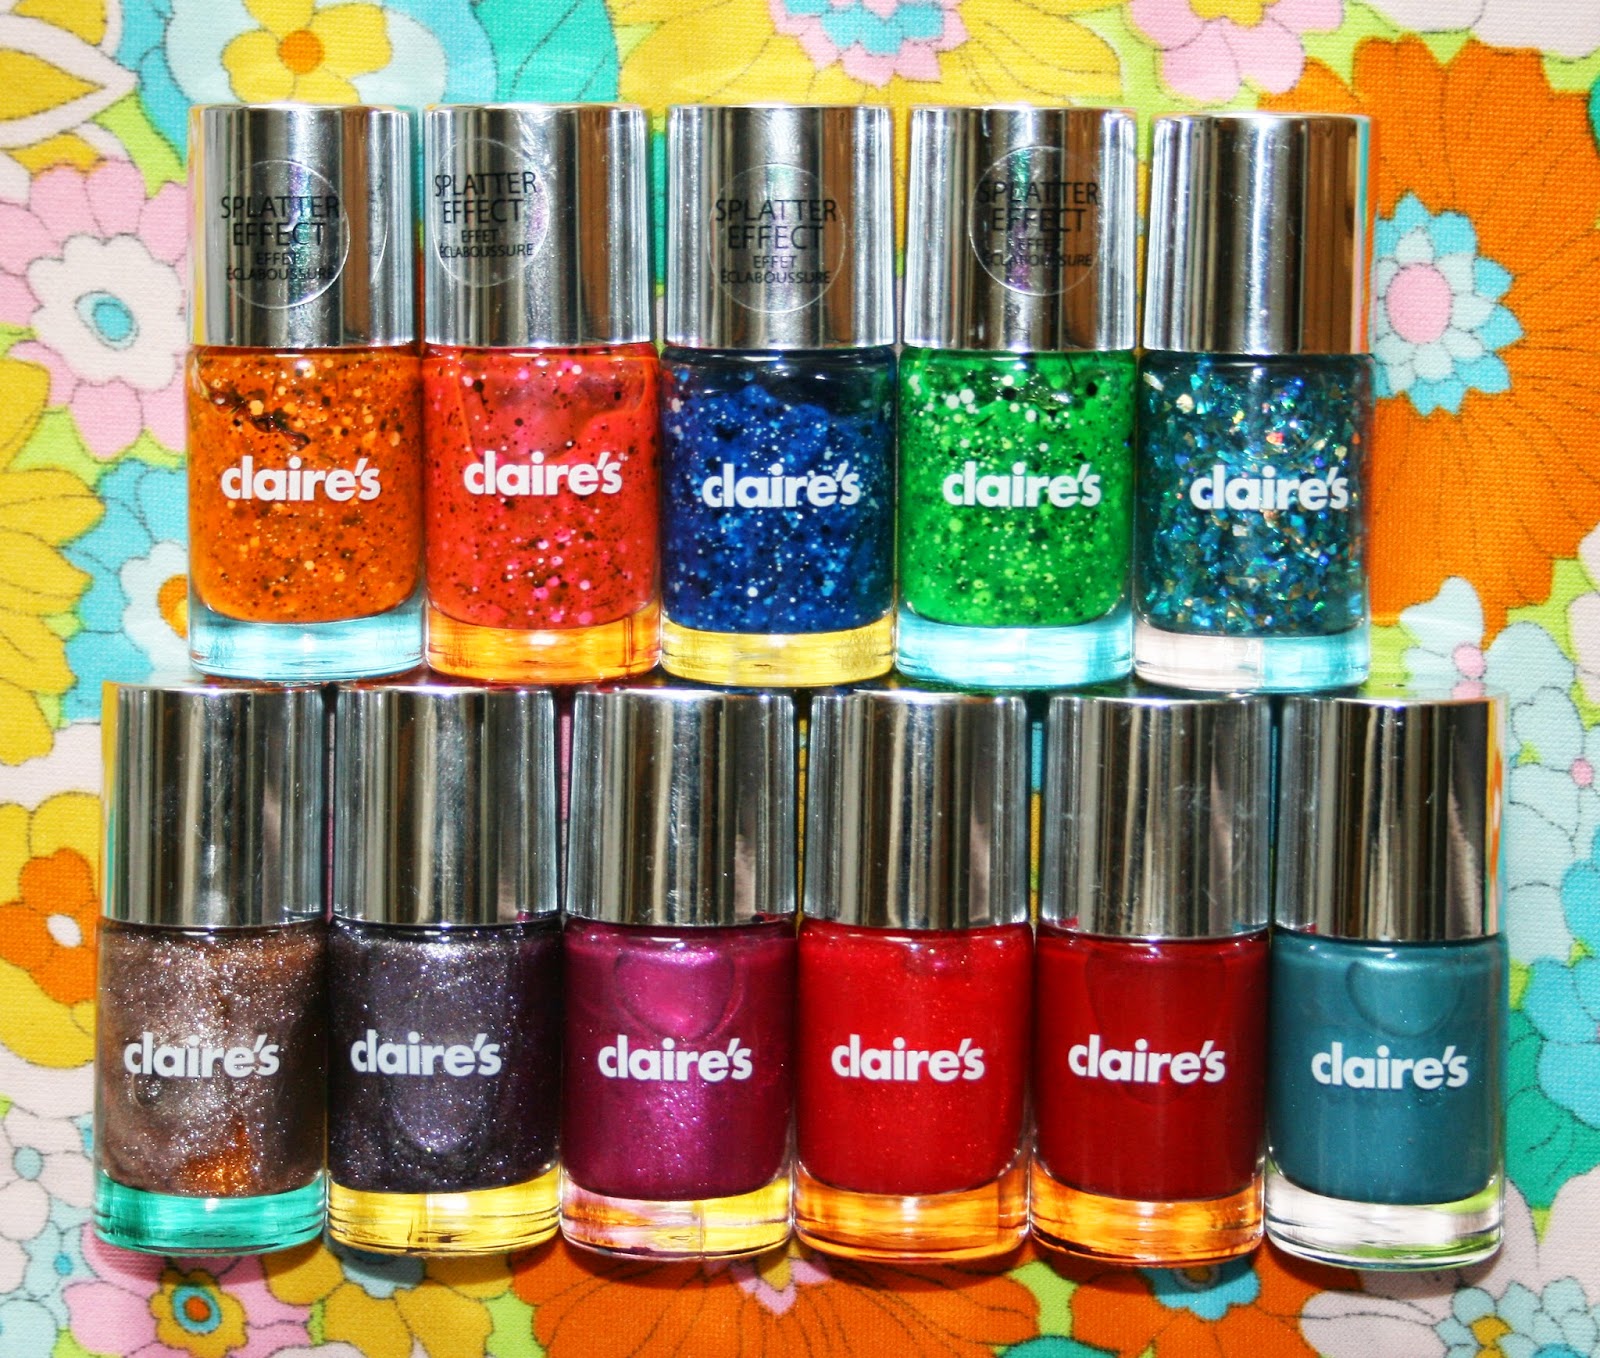 Claire's Splatter Effect Nails - Nail A College Drop Out